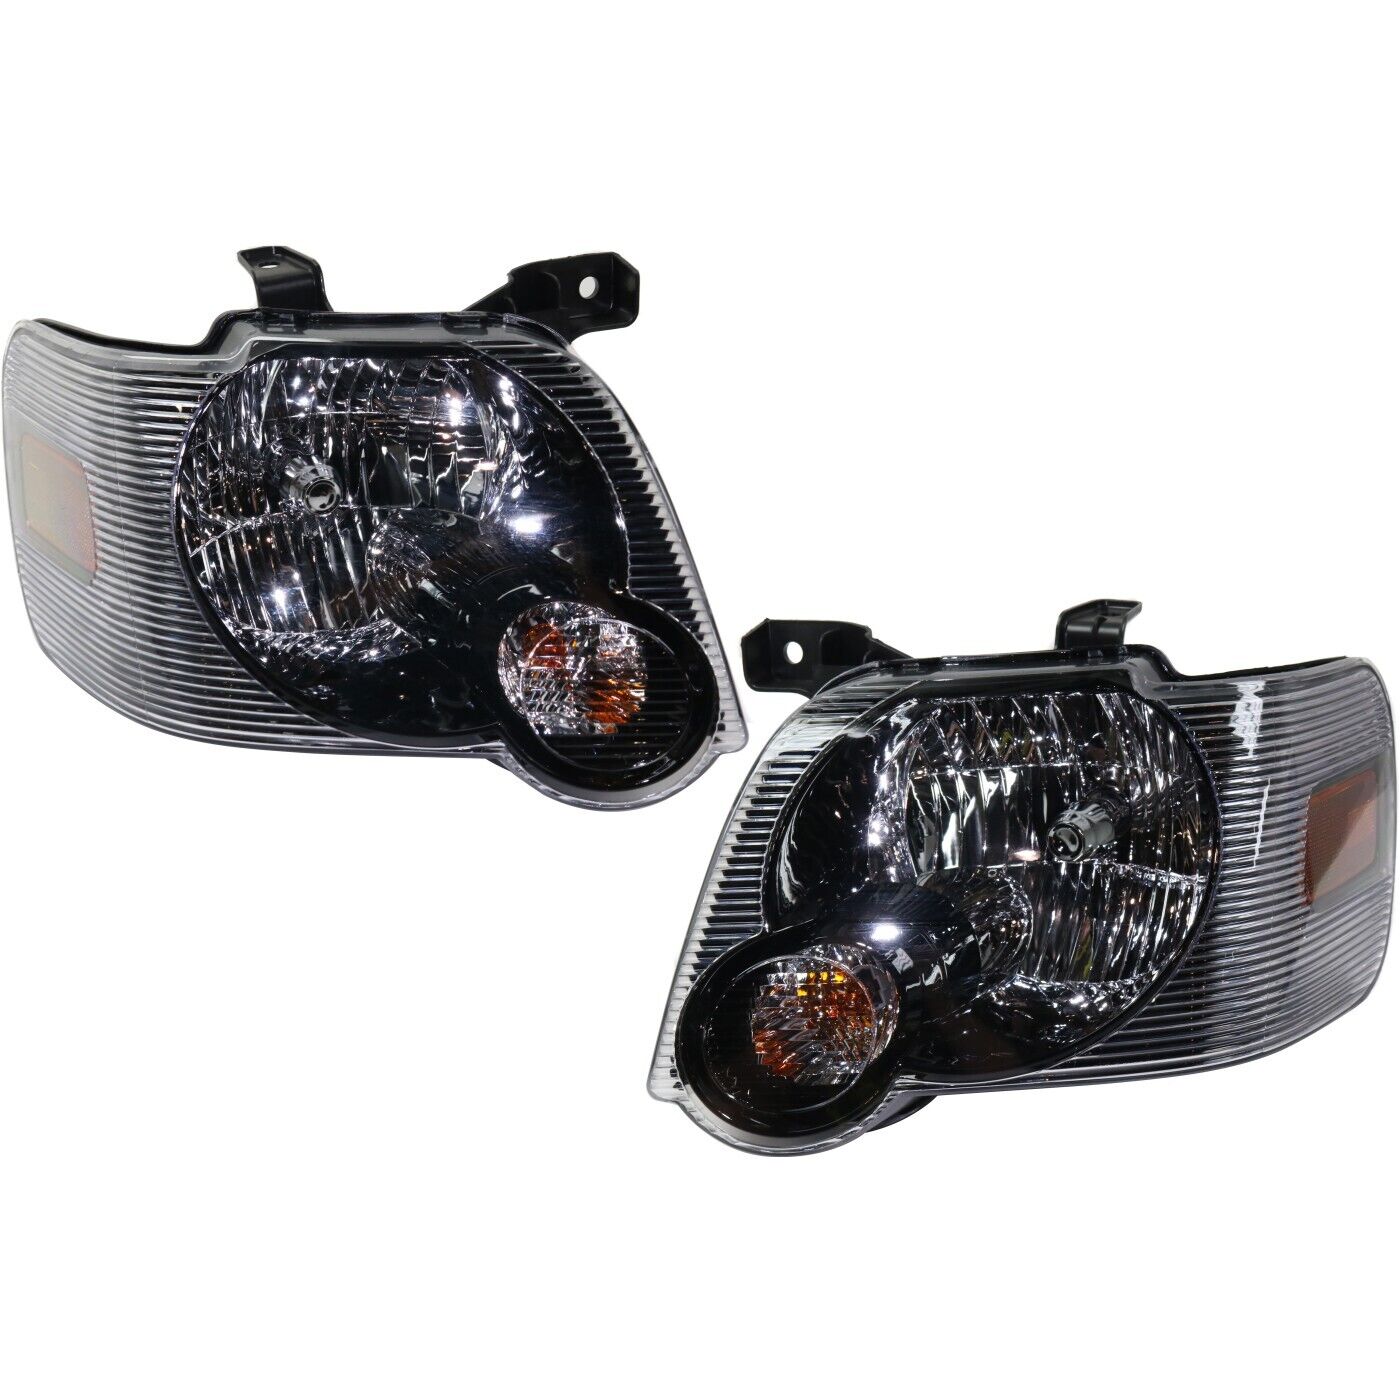 Headlight Set For 2007-2010 Ford Explorer Left and Right With Bulb 2Pc